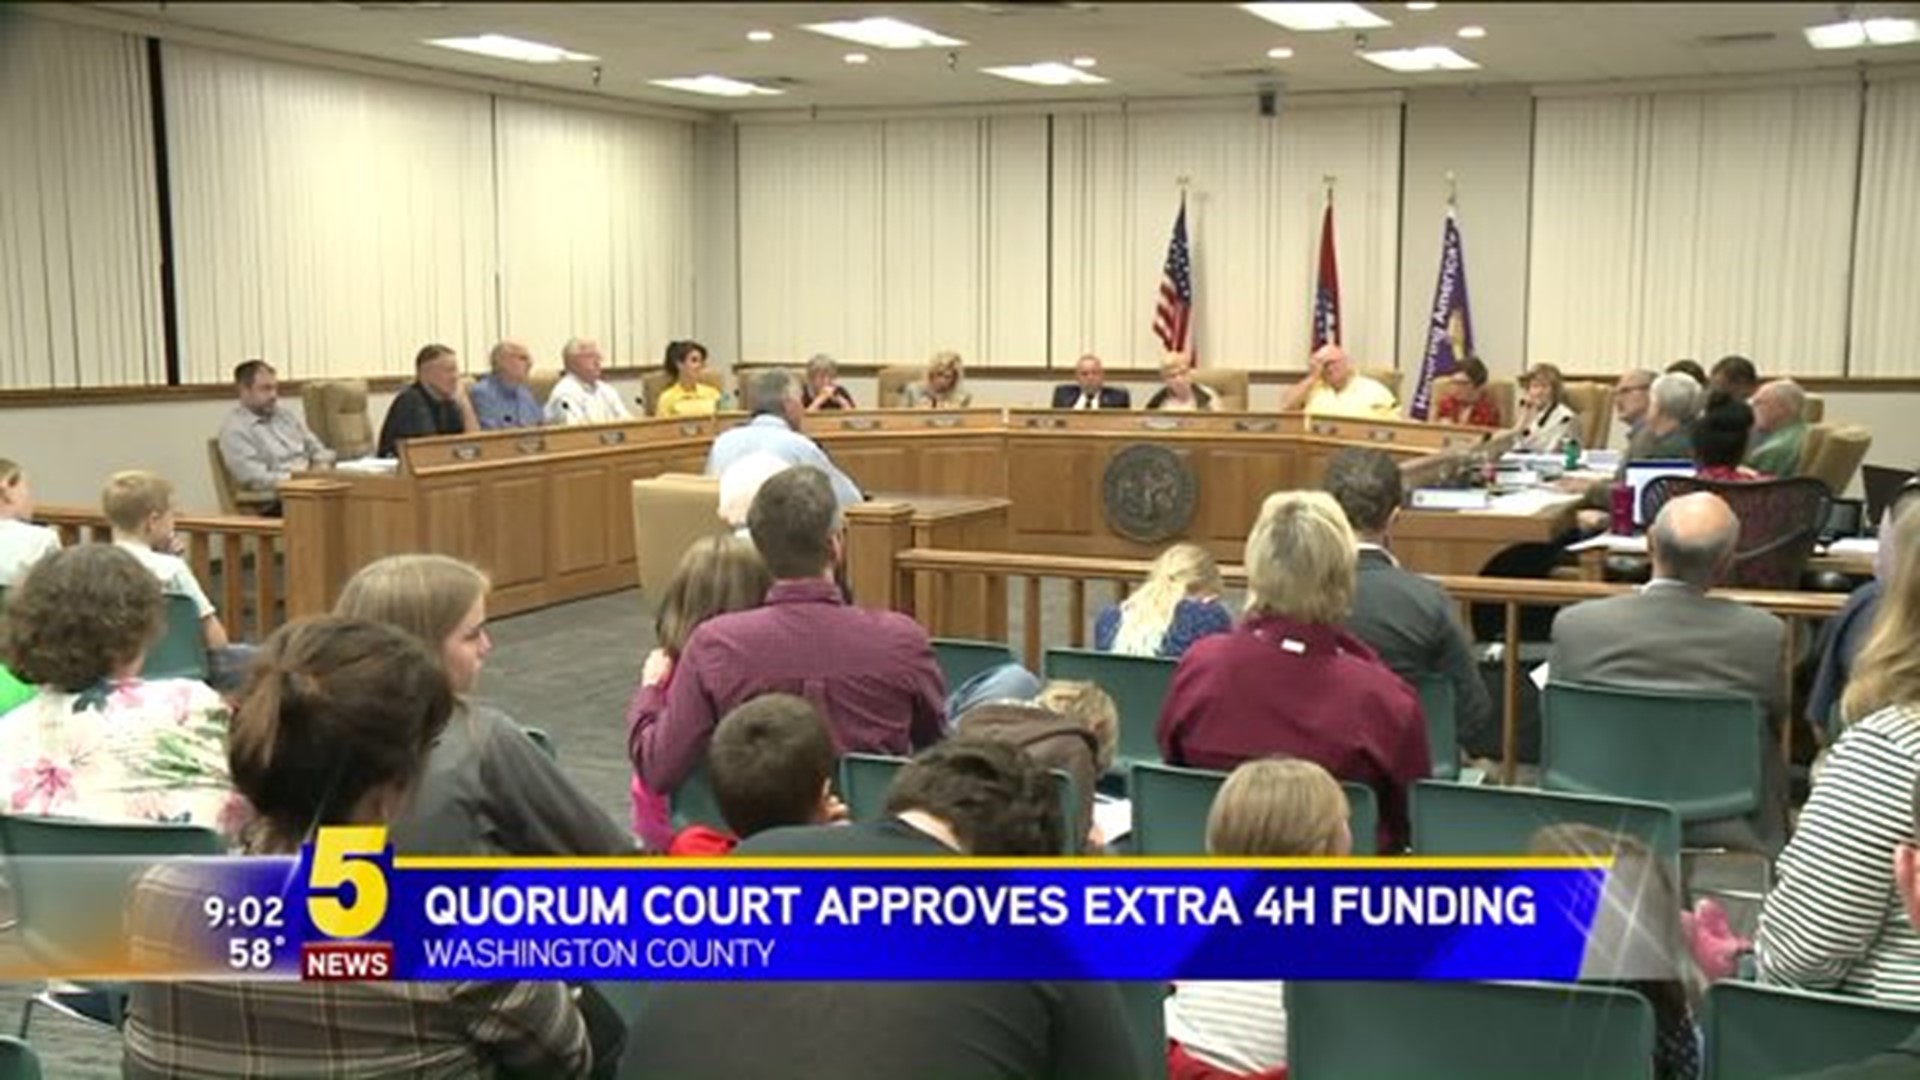 Extra 4H Funding Approved